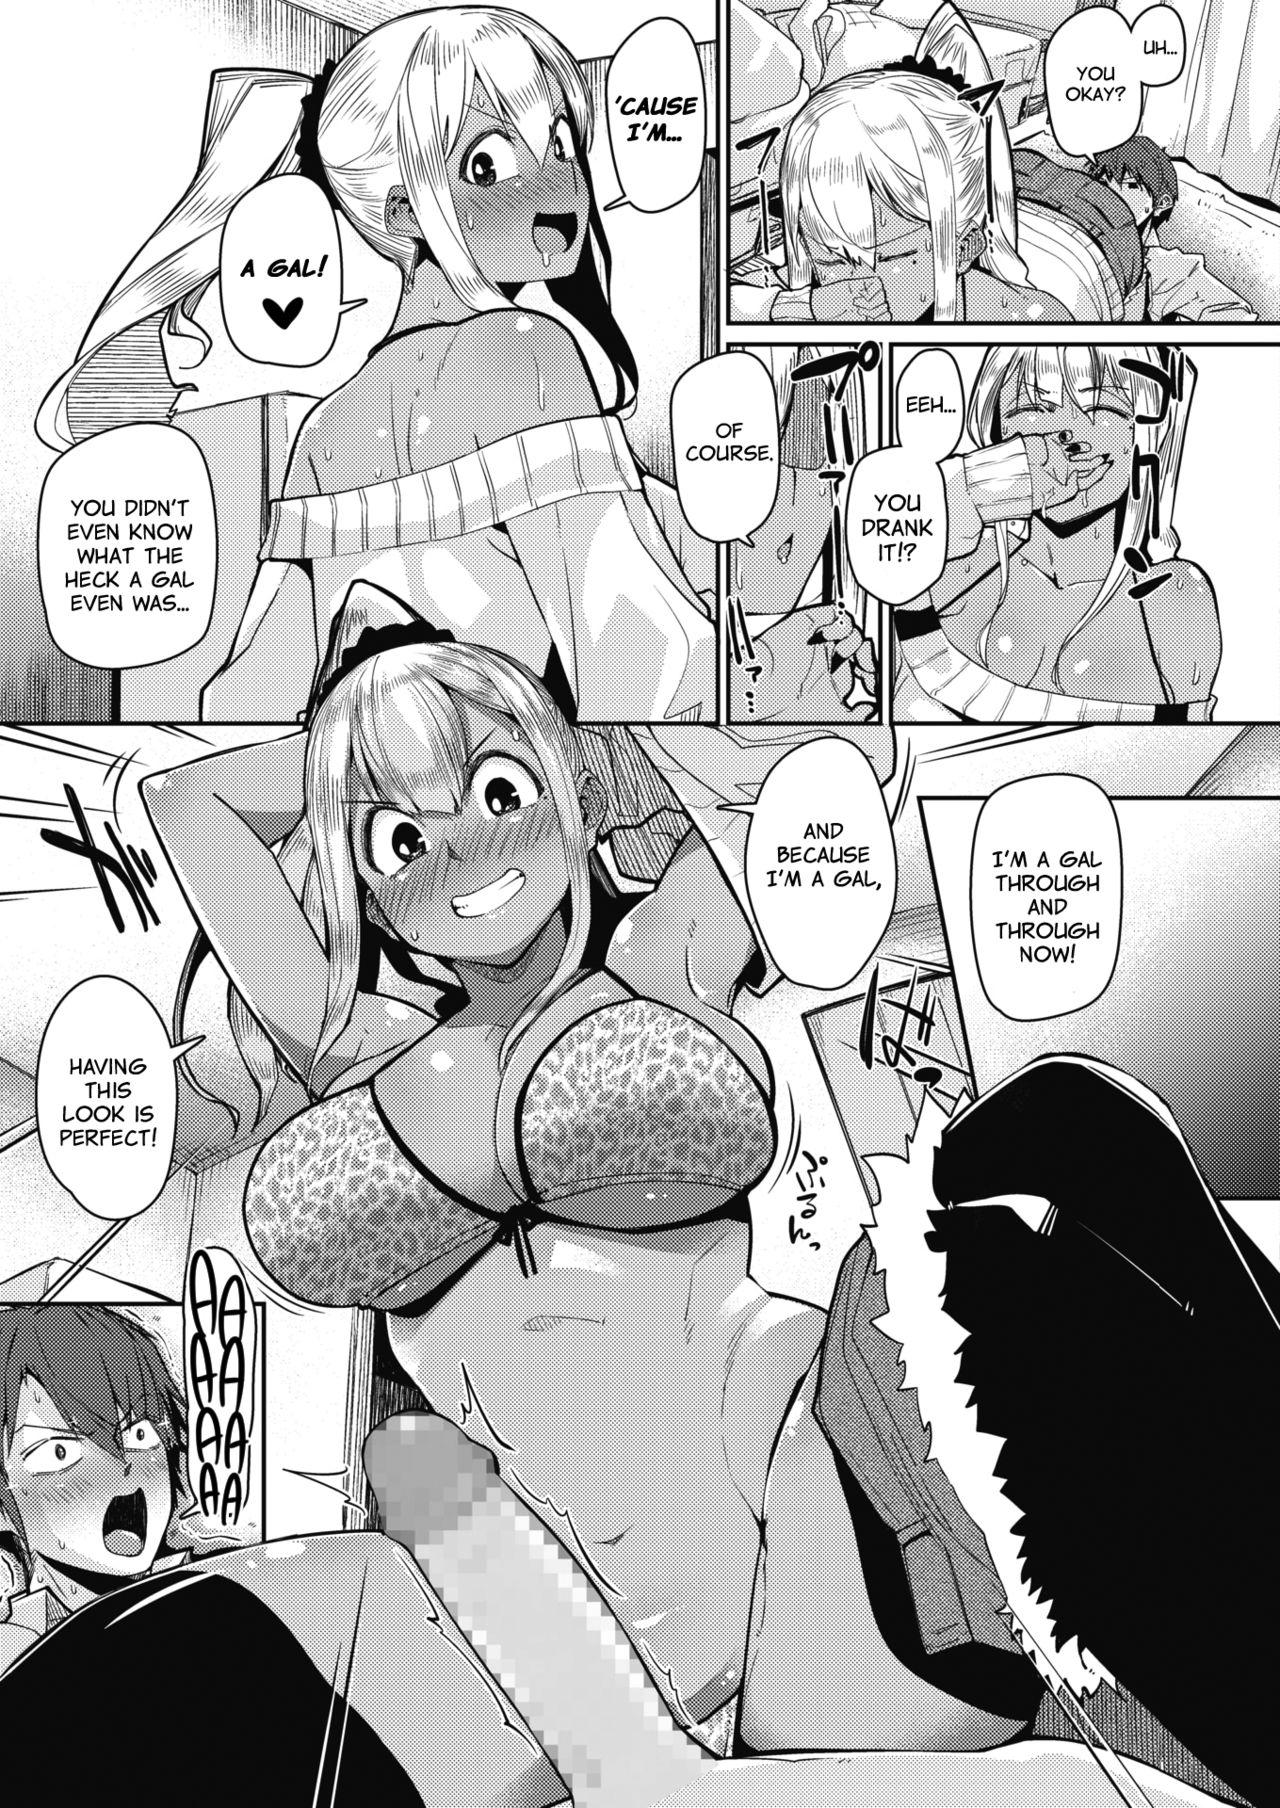 Big Black Dick Gekkan "Za Bicchi" wo Mita Onna no Hannou ni Tsuite | About the Reaction of the Girl Who Saw "The Bitch Monthly" Hot Women Having Sex - Page 11